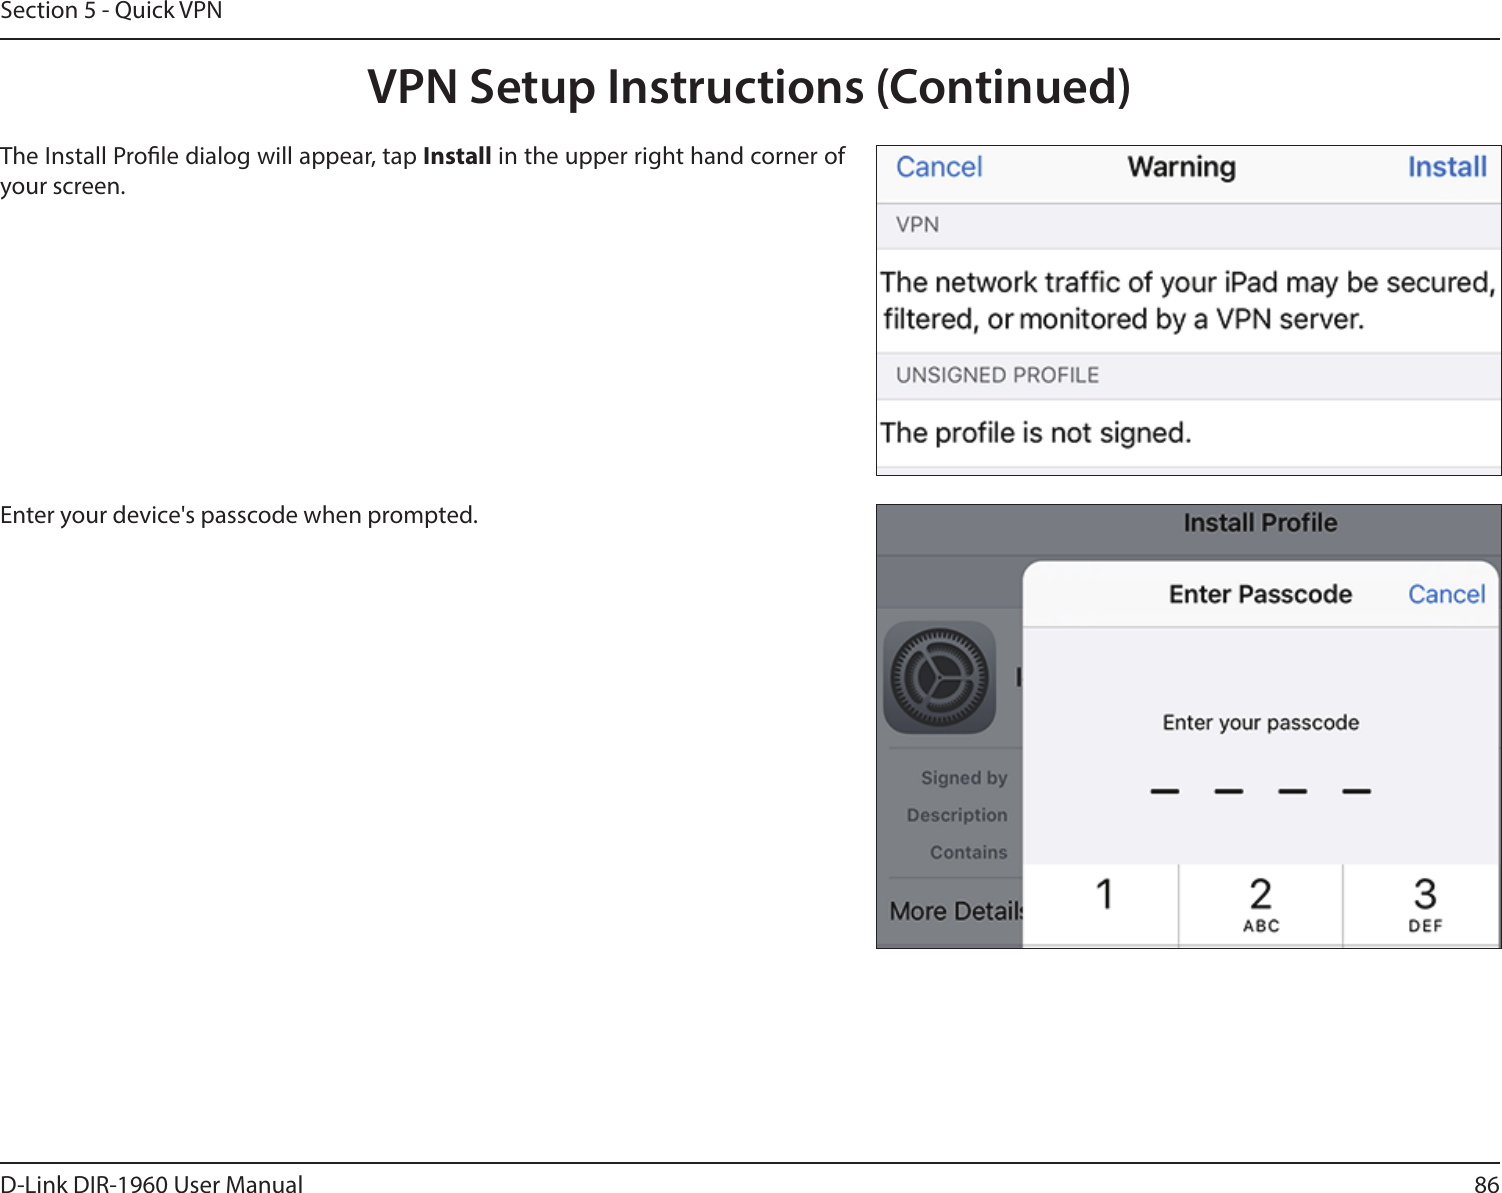 86D-Link DIR-1960 User ManualSection 5 - Quick VPNThe Install Prole dialog will appear, tap Install in the upper right hand corner of your screen.Enter your device&apos;s passcode when prompted. VPN Setup Instructions (Continued)